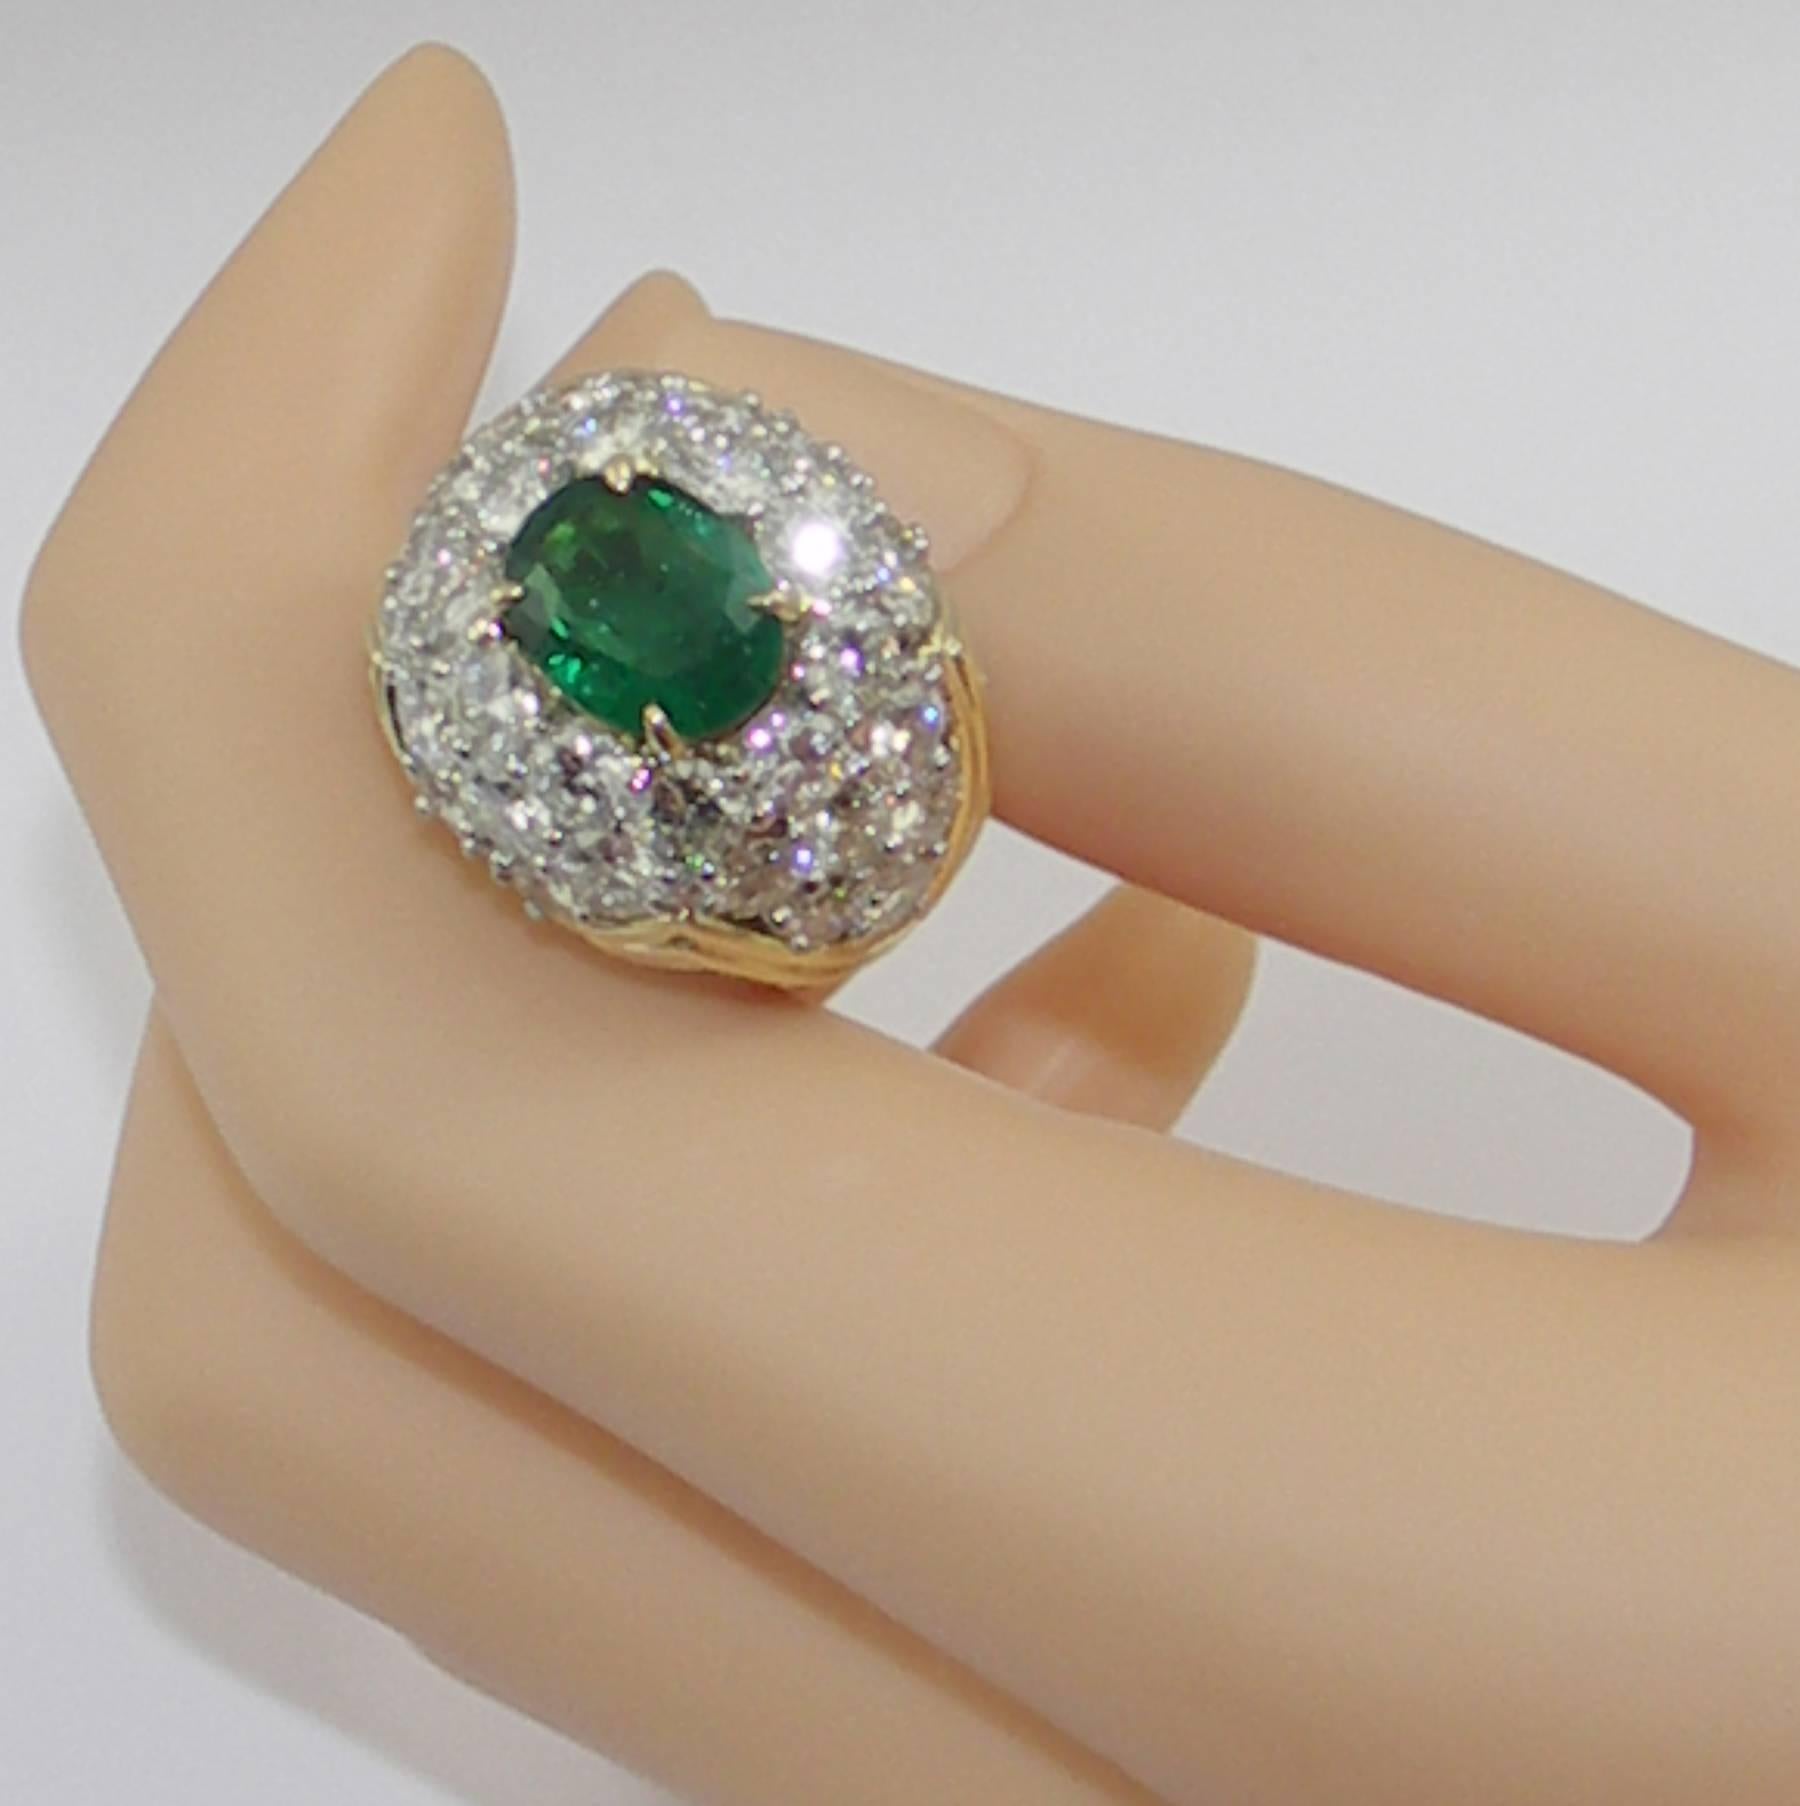  One ladies 18 karat yellow gold and platinum cocktail ring, centered around one oval faceted emerald weighing approximately 2 1/2 carats, with a lively green tone and excellent saturation. Surrounding the emerald are round brilliant cut diamonds